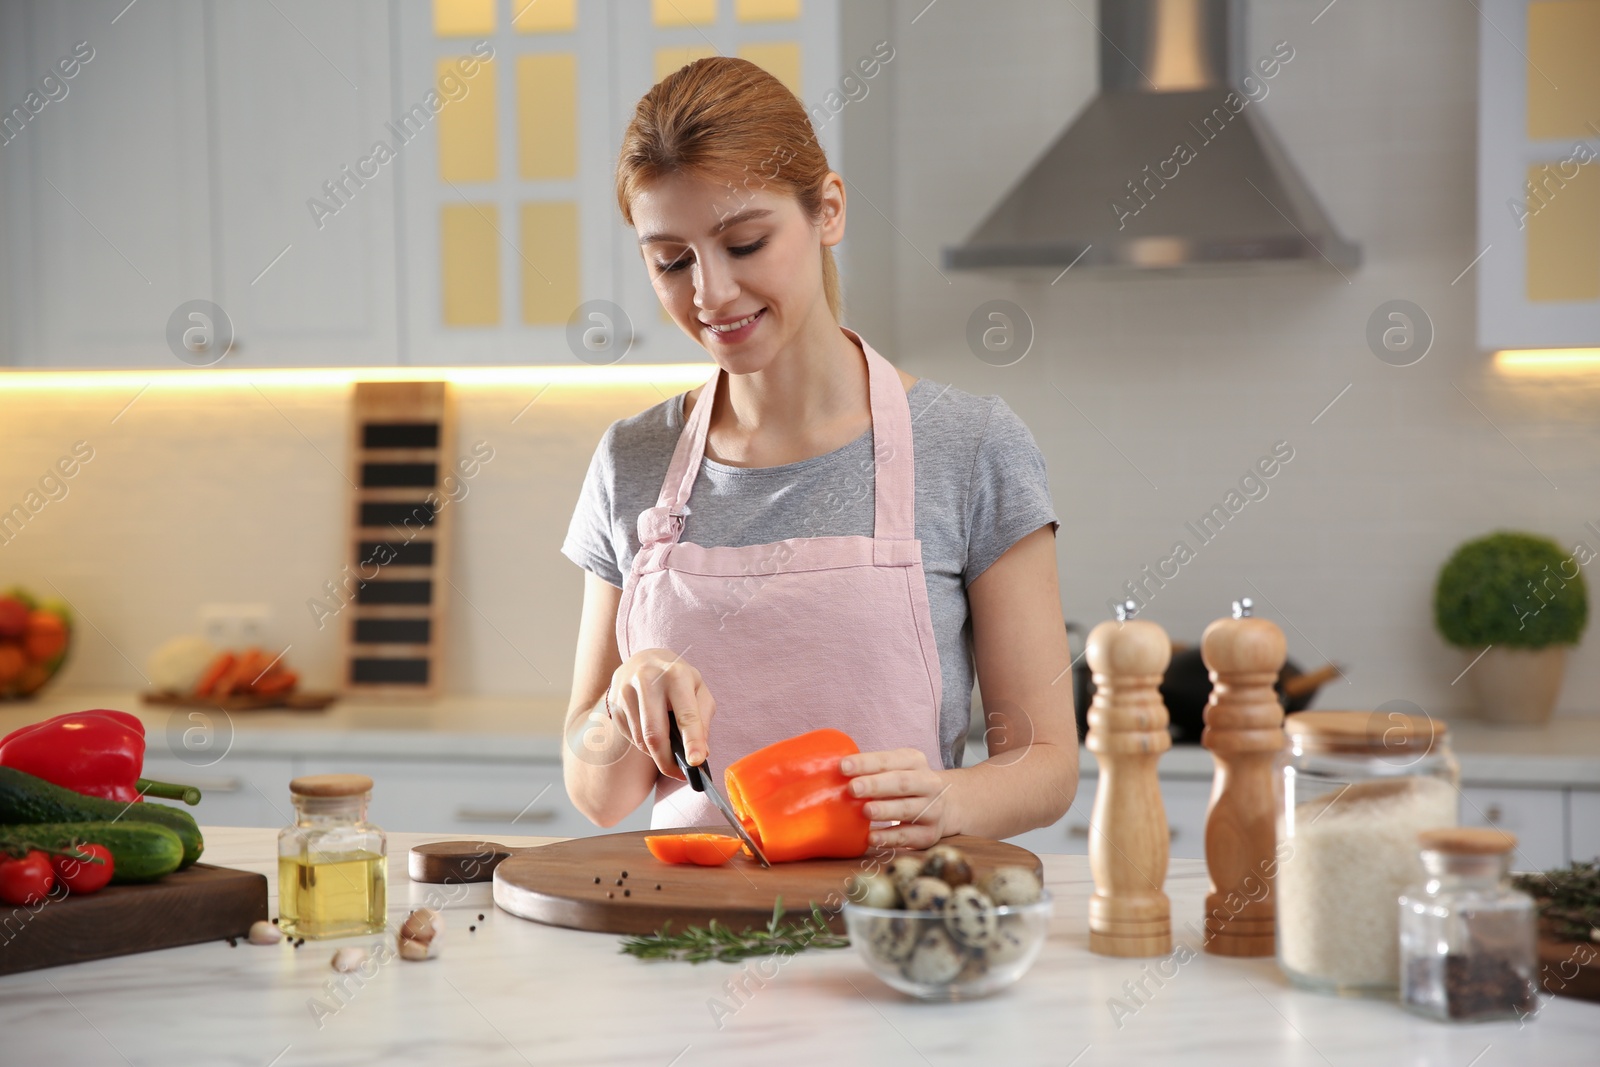 Photo of Young woman cooking at table in kitchen